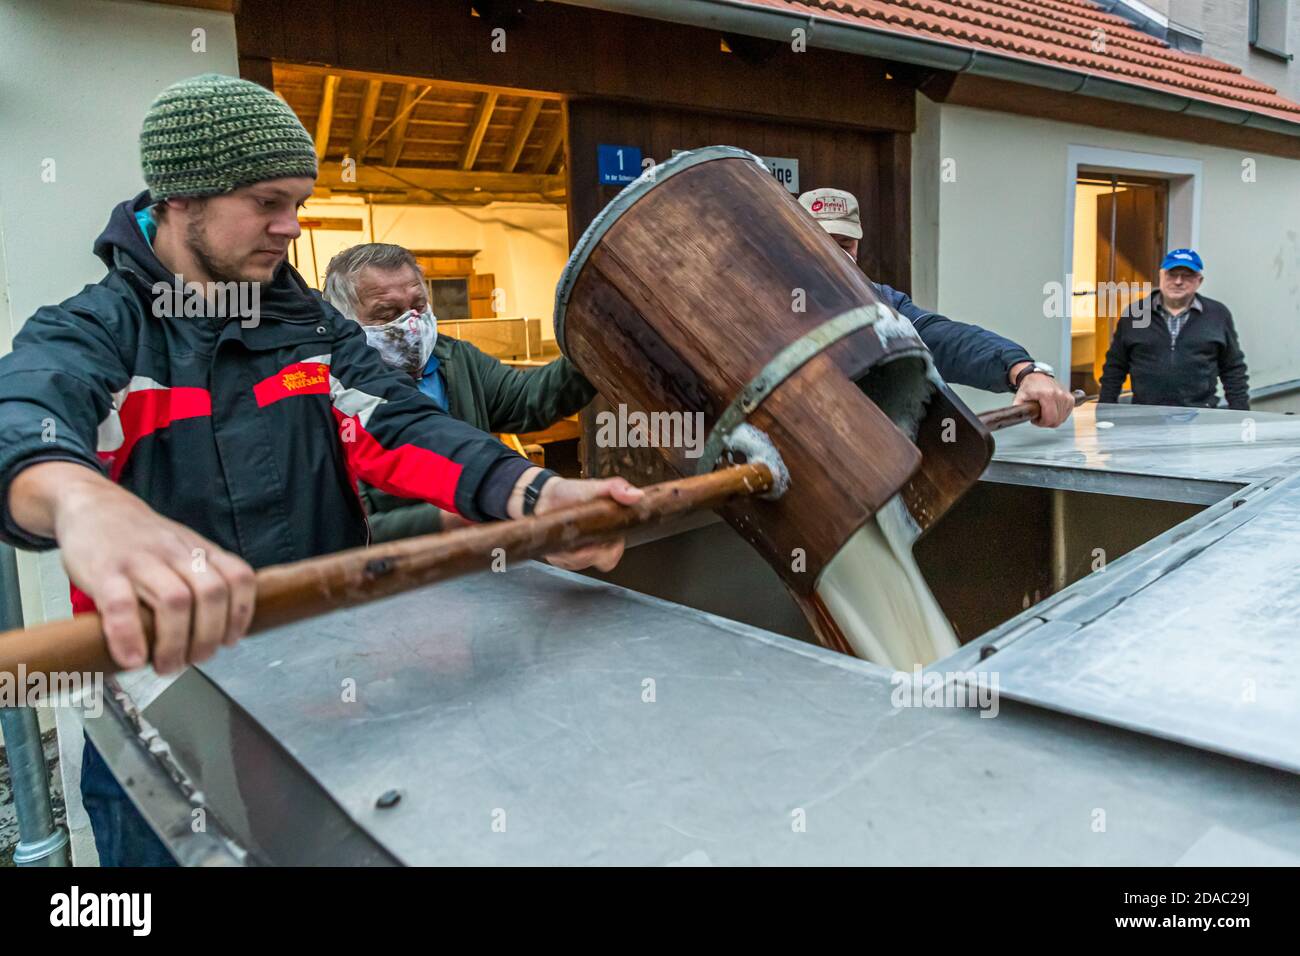 Traditional Zoigl Brewery. The Zoigl original wort is lively filled into the tanker with traditional wooden buckets in Falkenberg, Germany Stock Photo